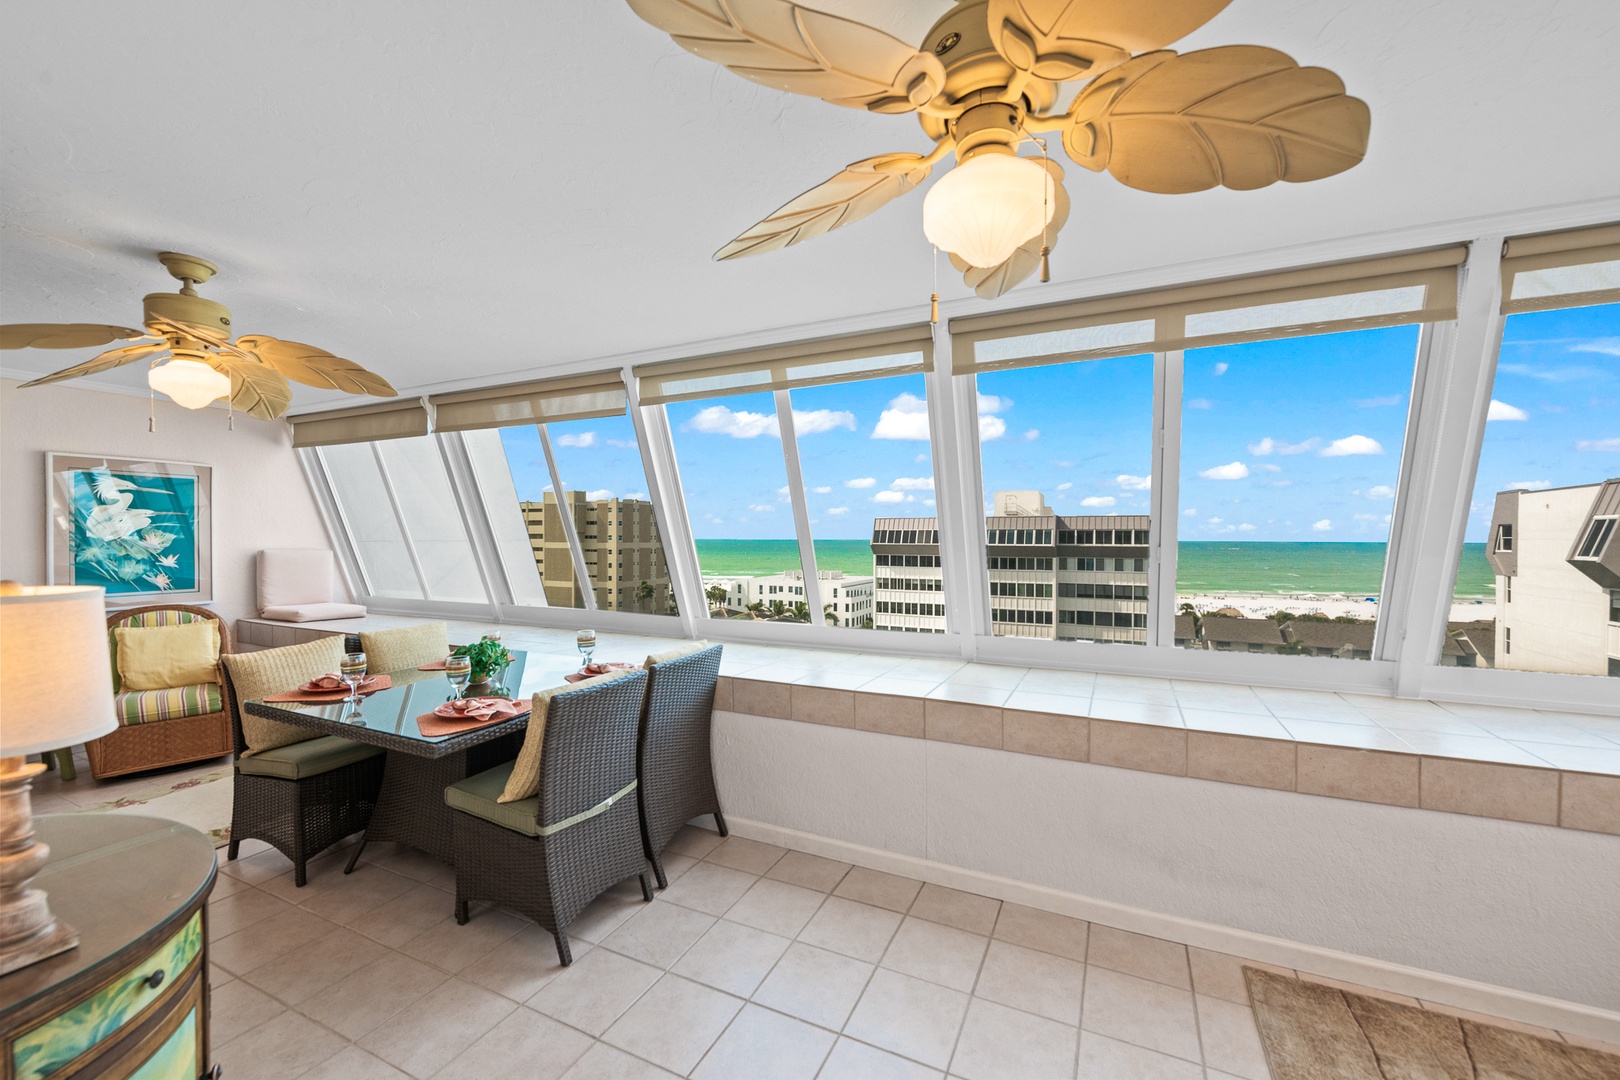 Peppertree Penthouse #803 - Tropical Sands Accommodations